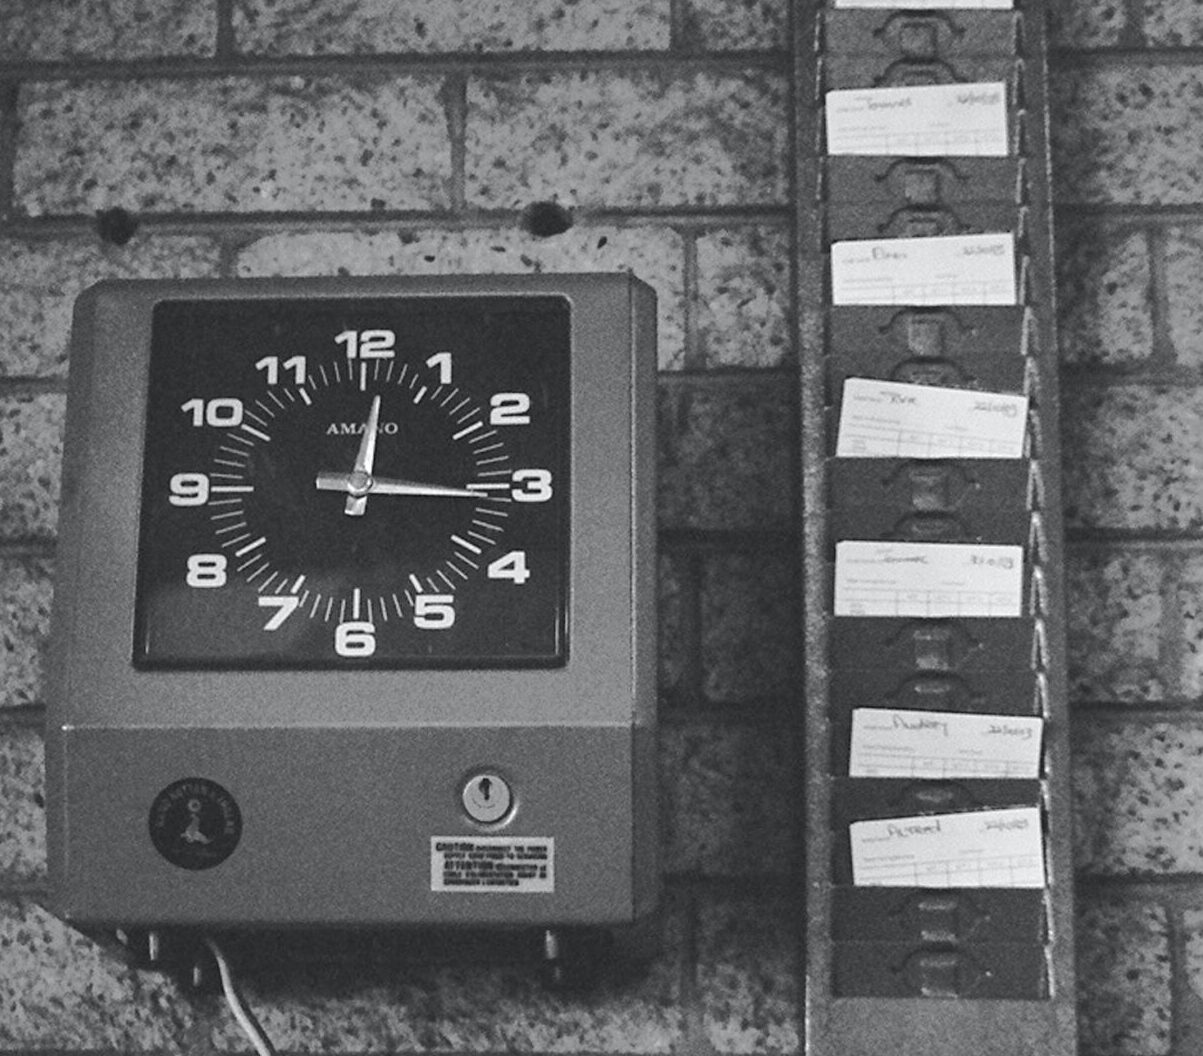 Variation to Contracted Hours - Black and white picture of an old fashioned clocking timecard machine